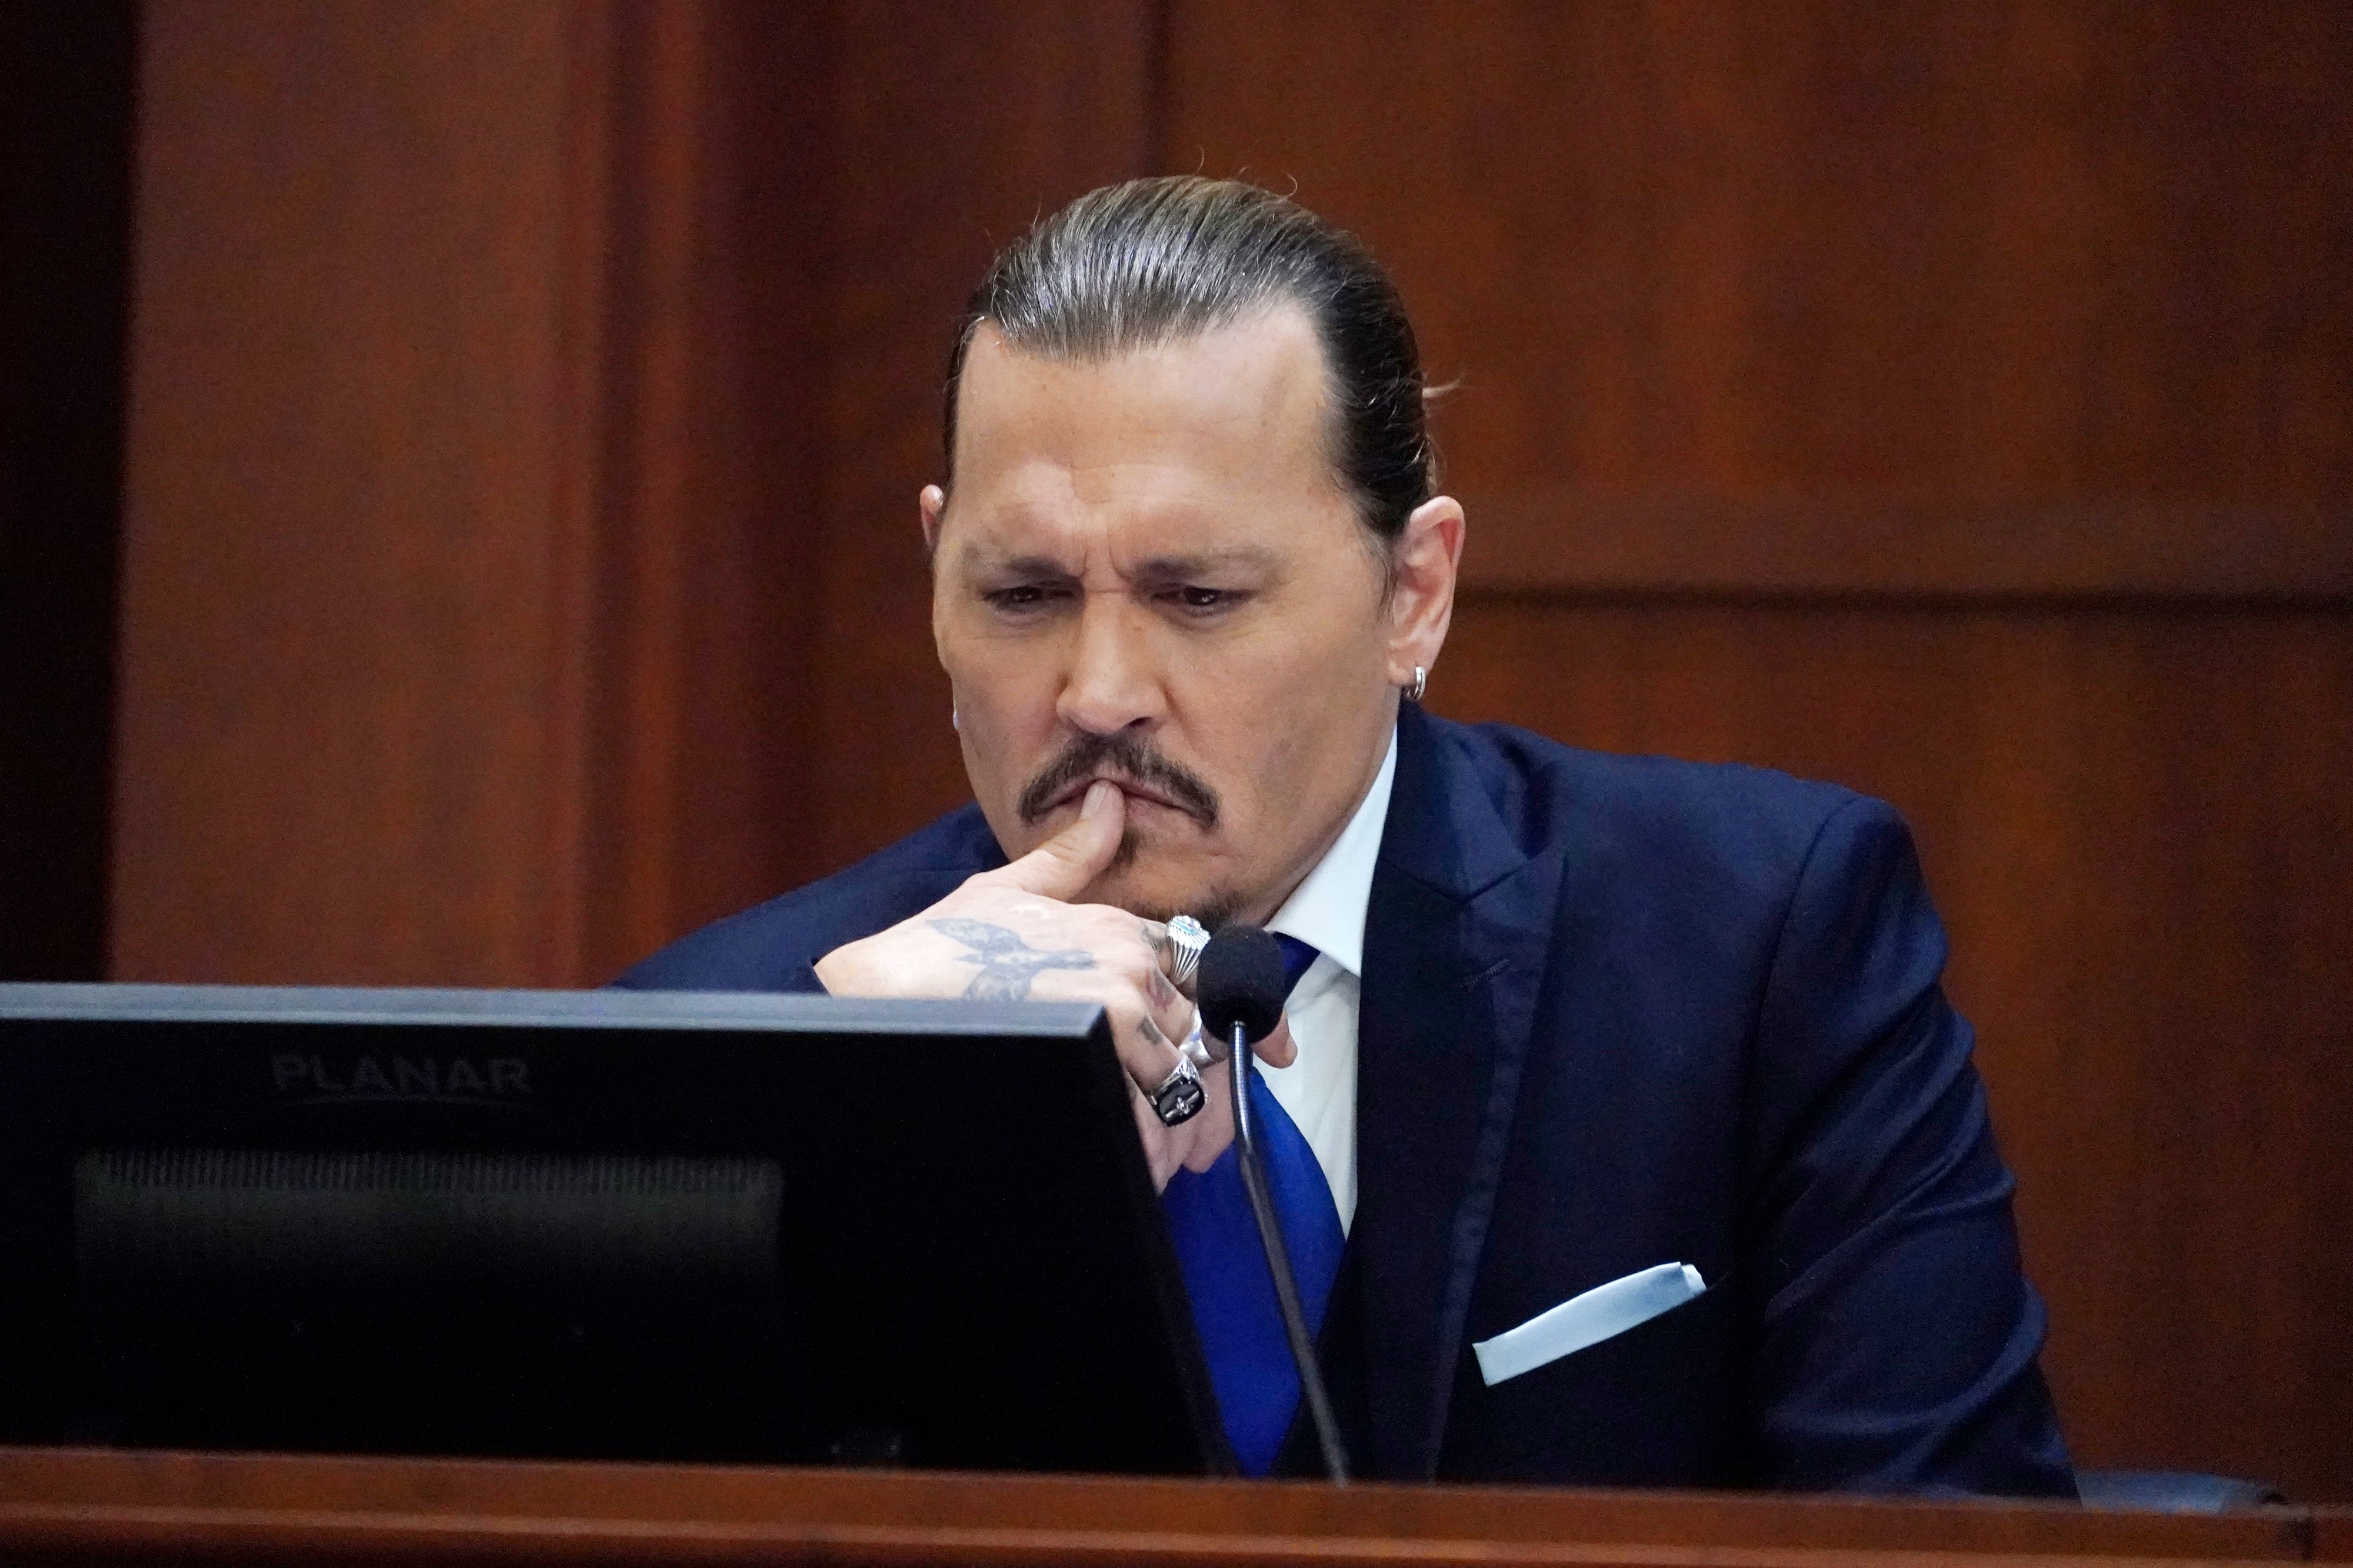 Johnny Depp on the stand